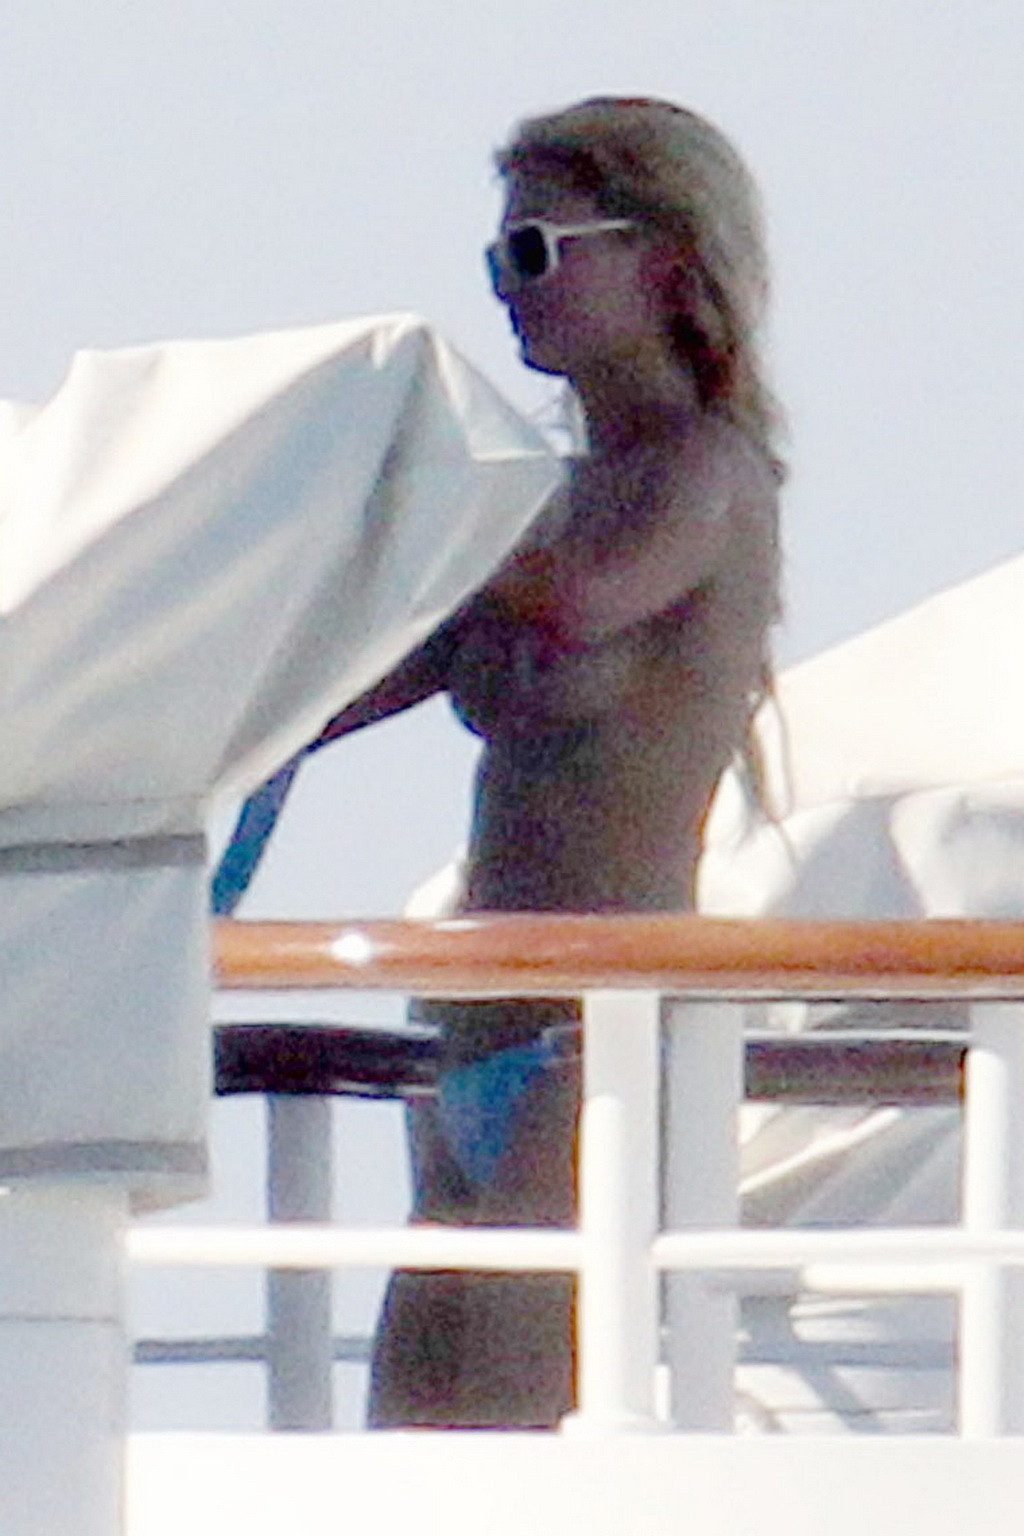 Paris Hilton topless showing off her small tits on a yacht in Italy #75340797